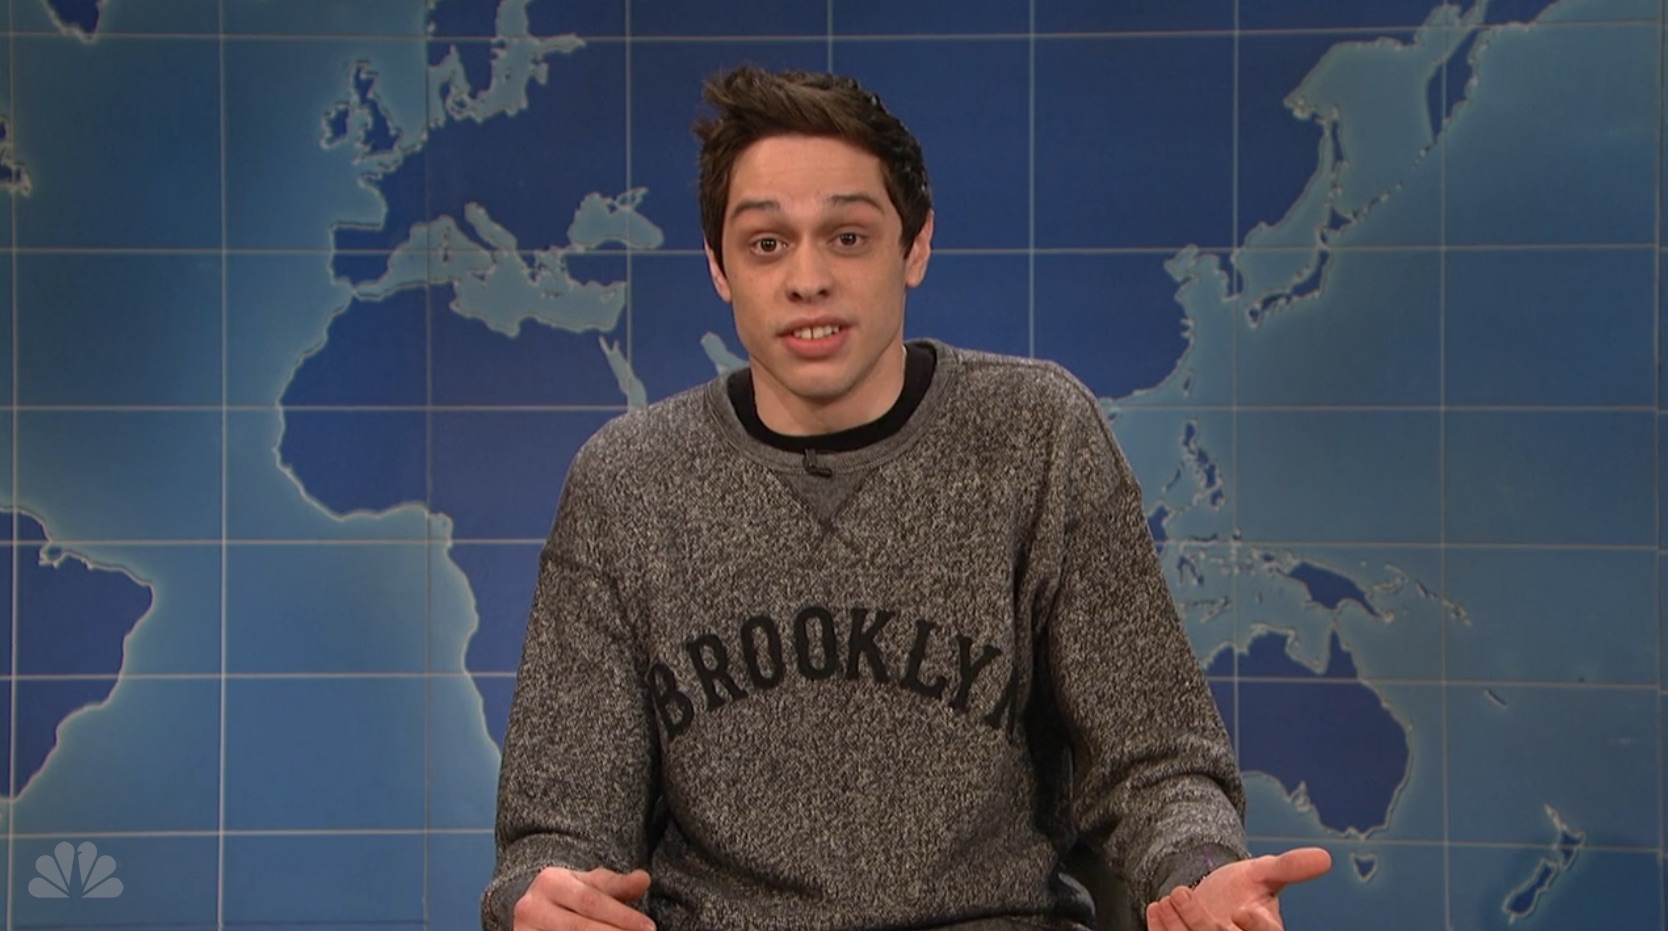 Pete Davidson shares emotional goodbye message ahead of his last Saturday Night Live episode: 'I'm so happy and sad'